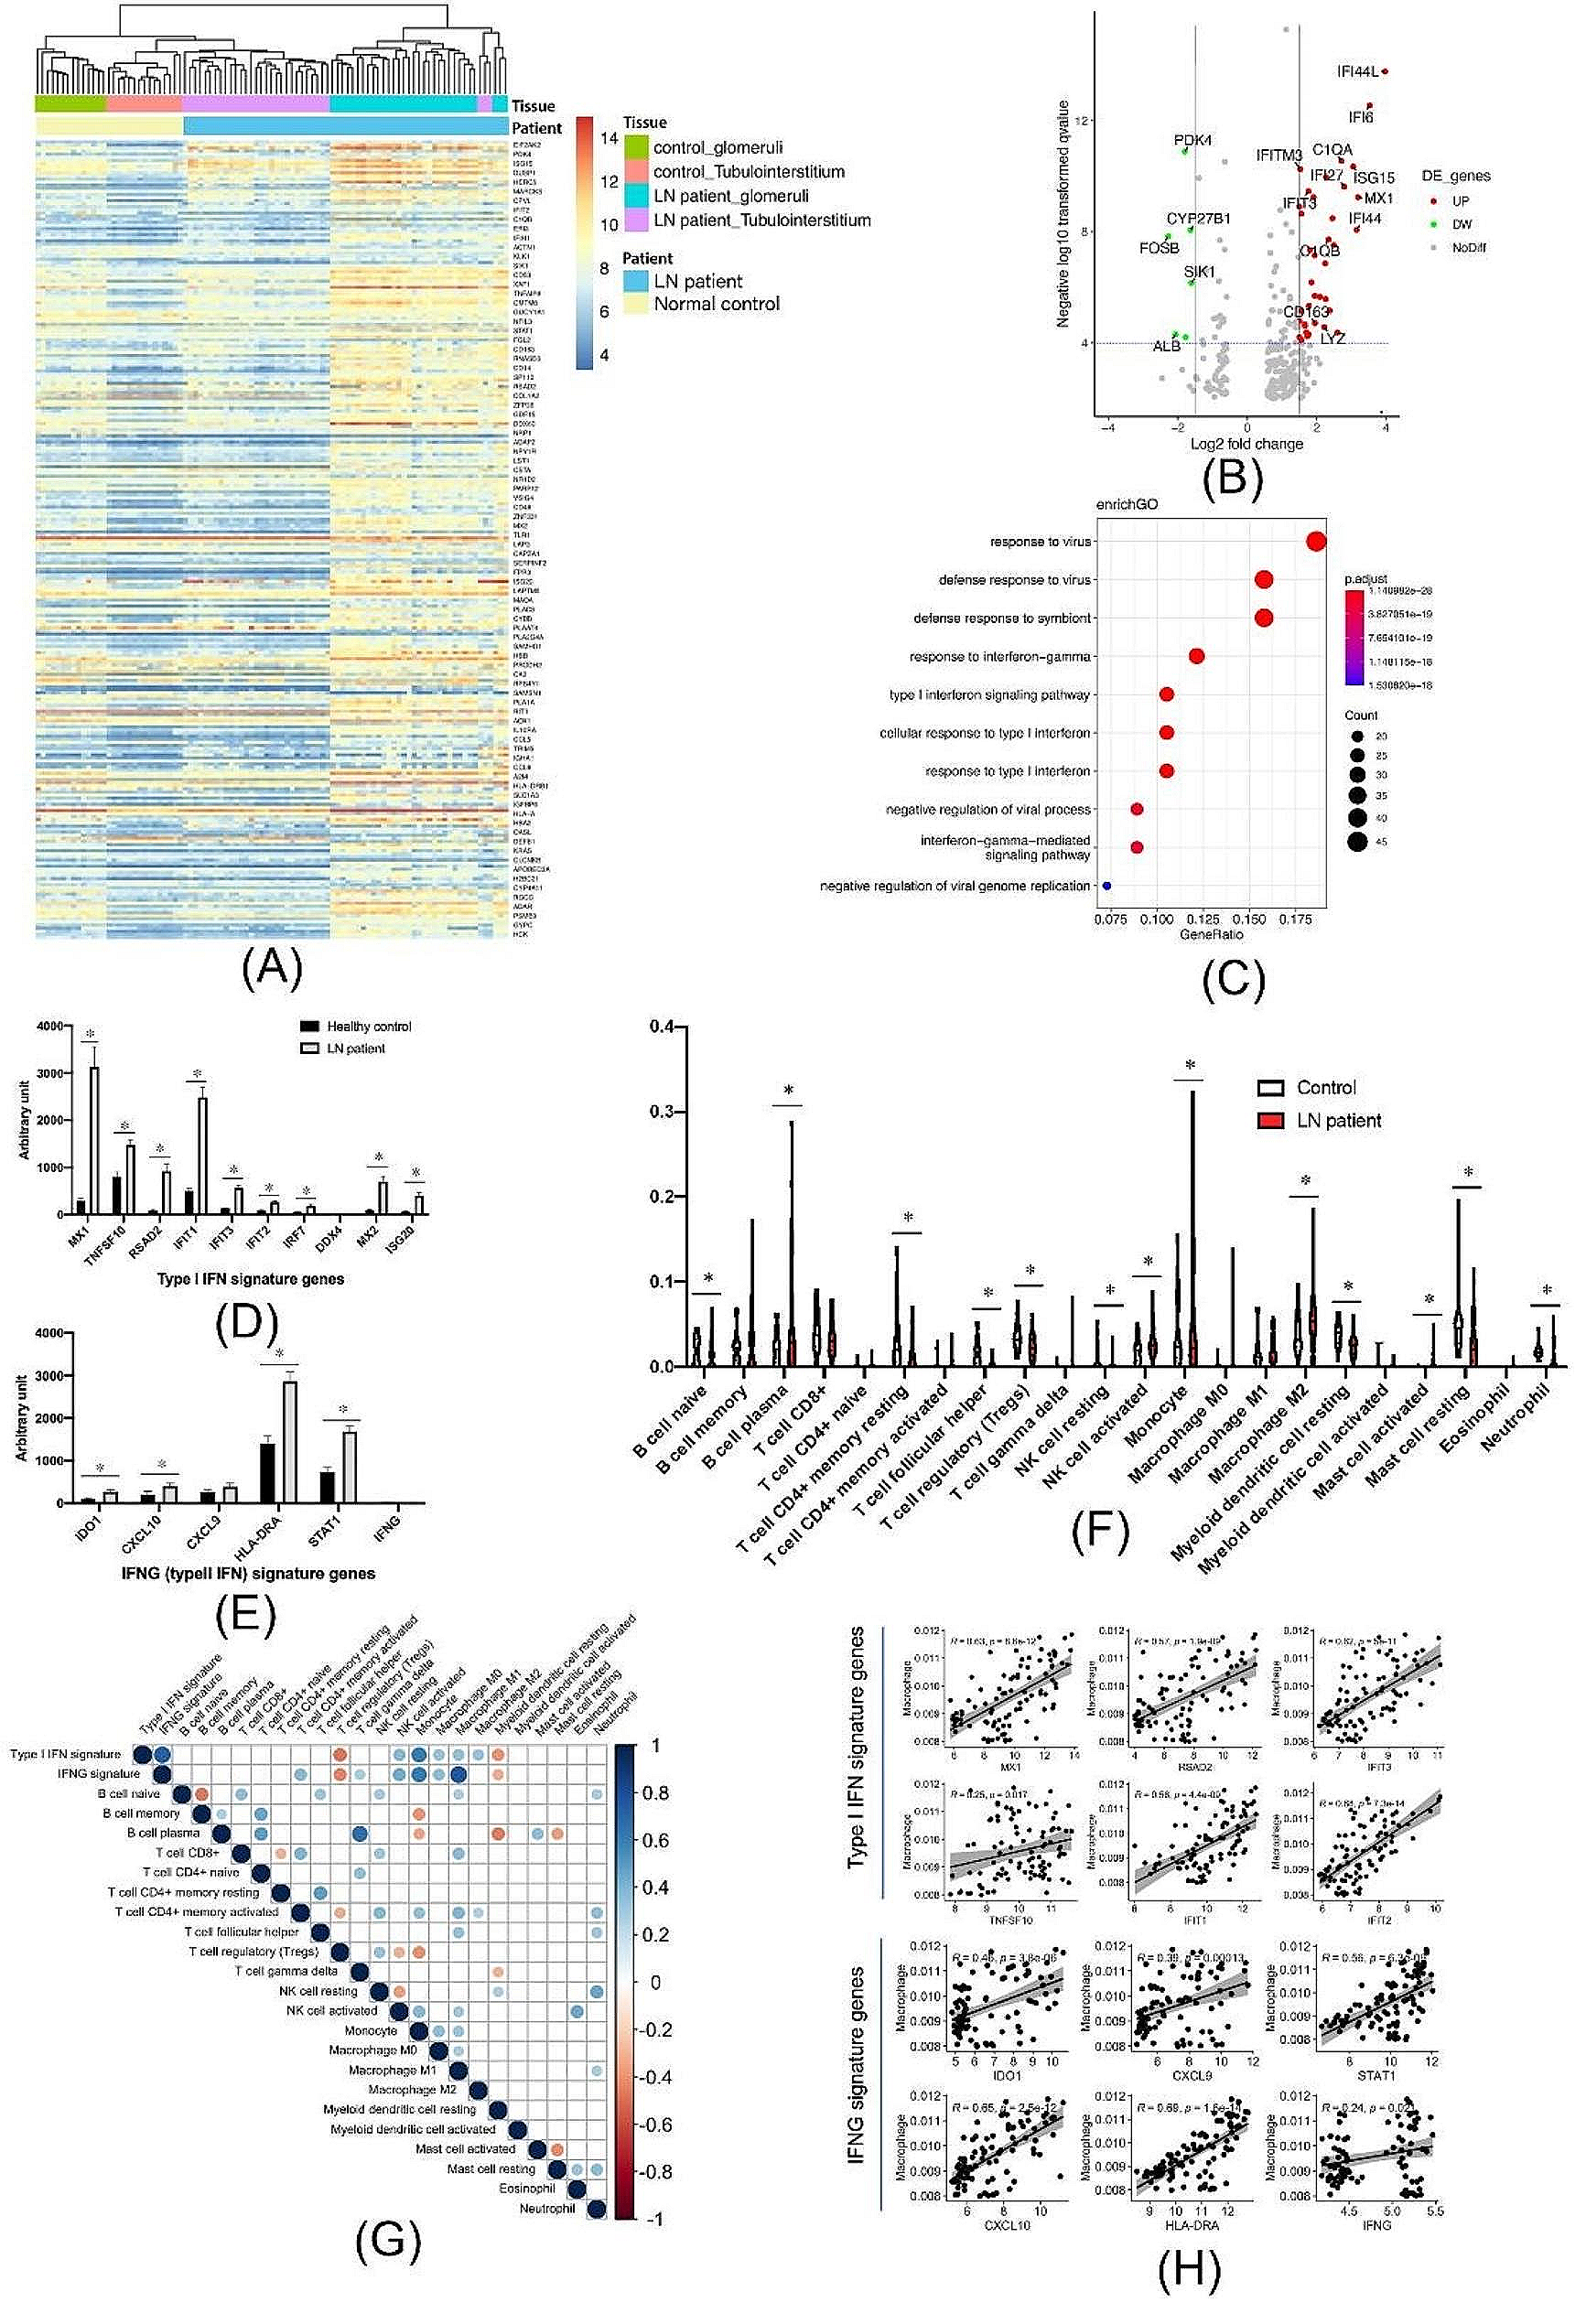 Integrative analysis of single-cell and bulk transcriptome data reveal the significant role of macrophages in lupus nephritis